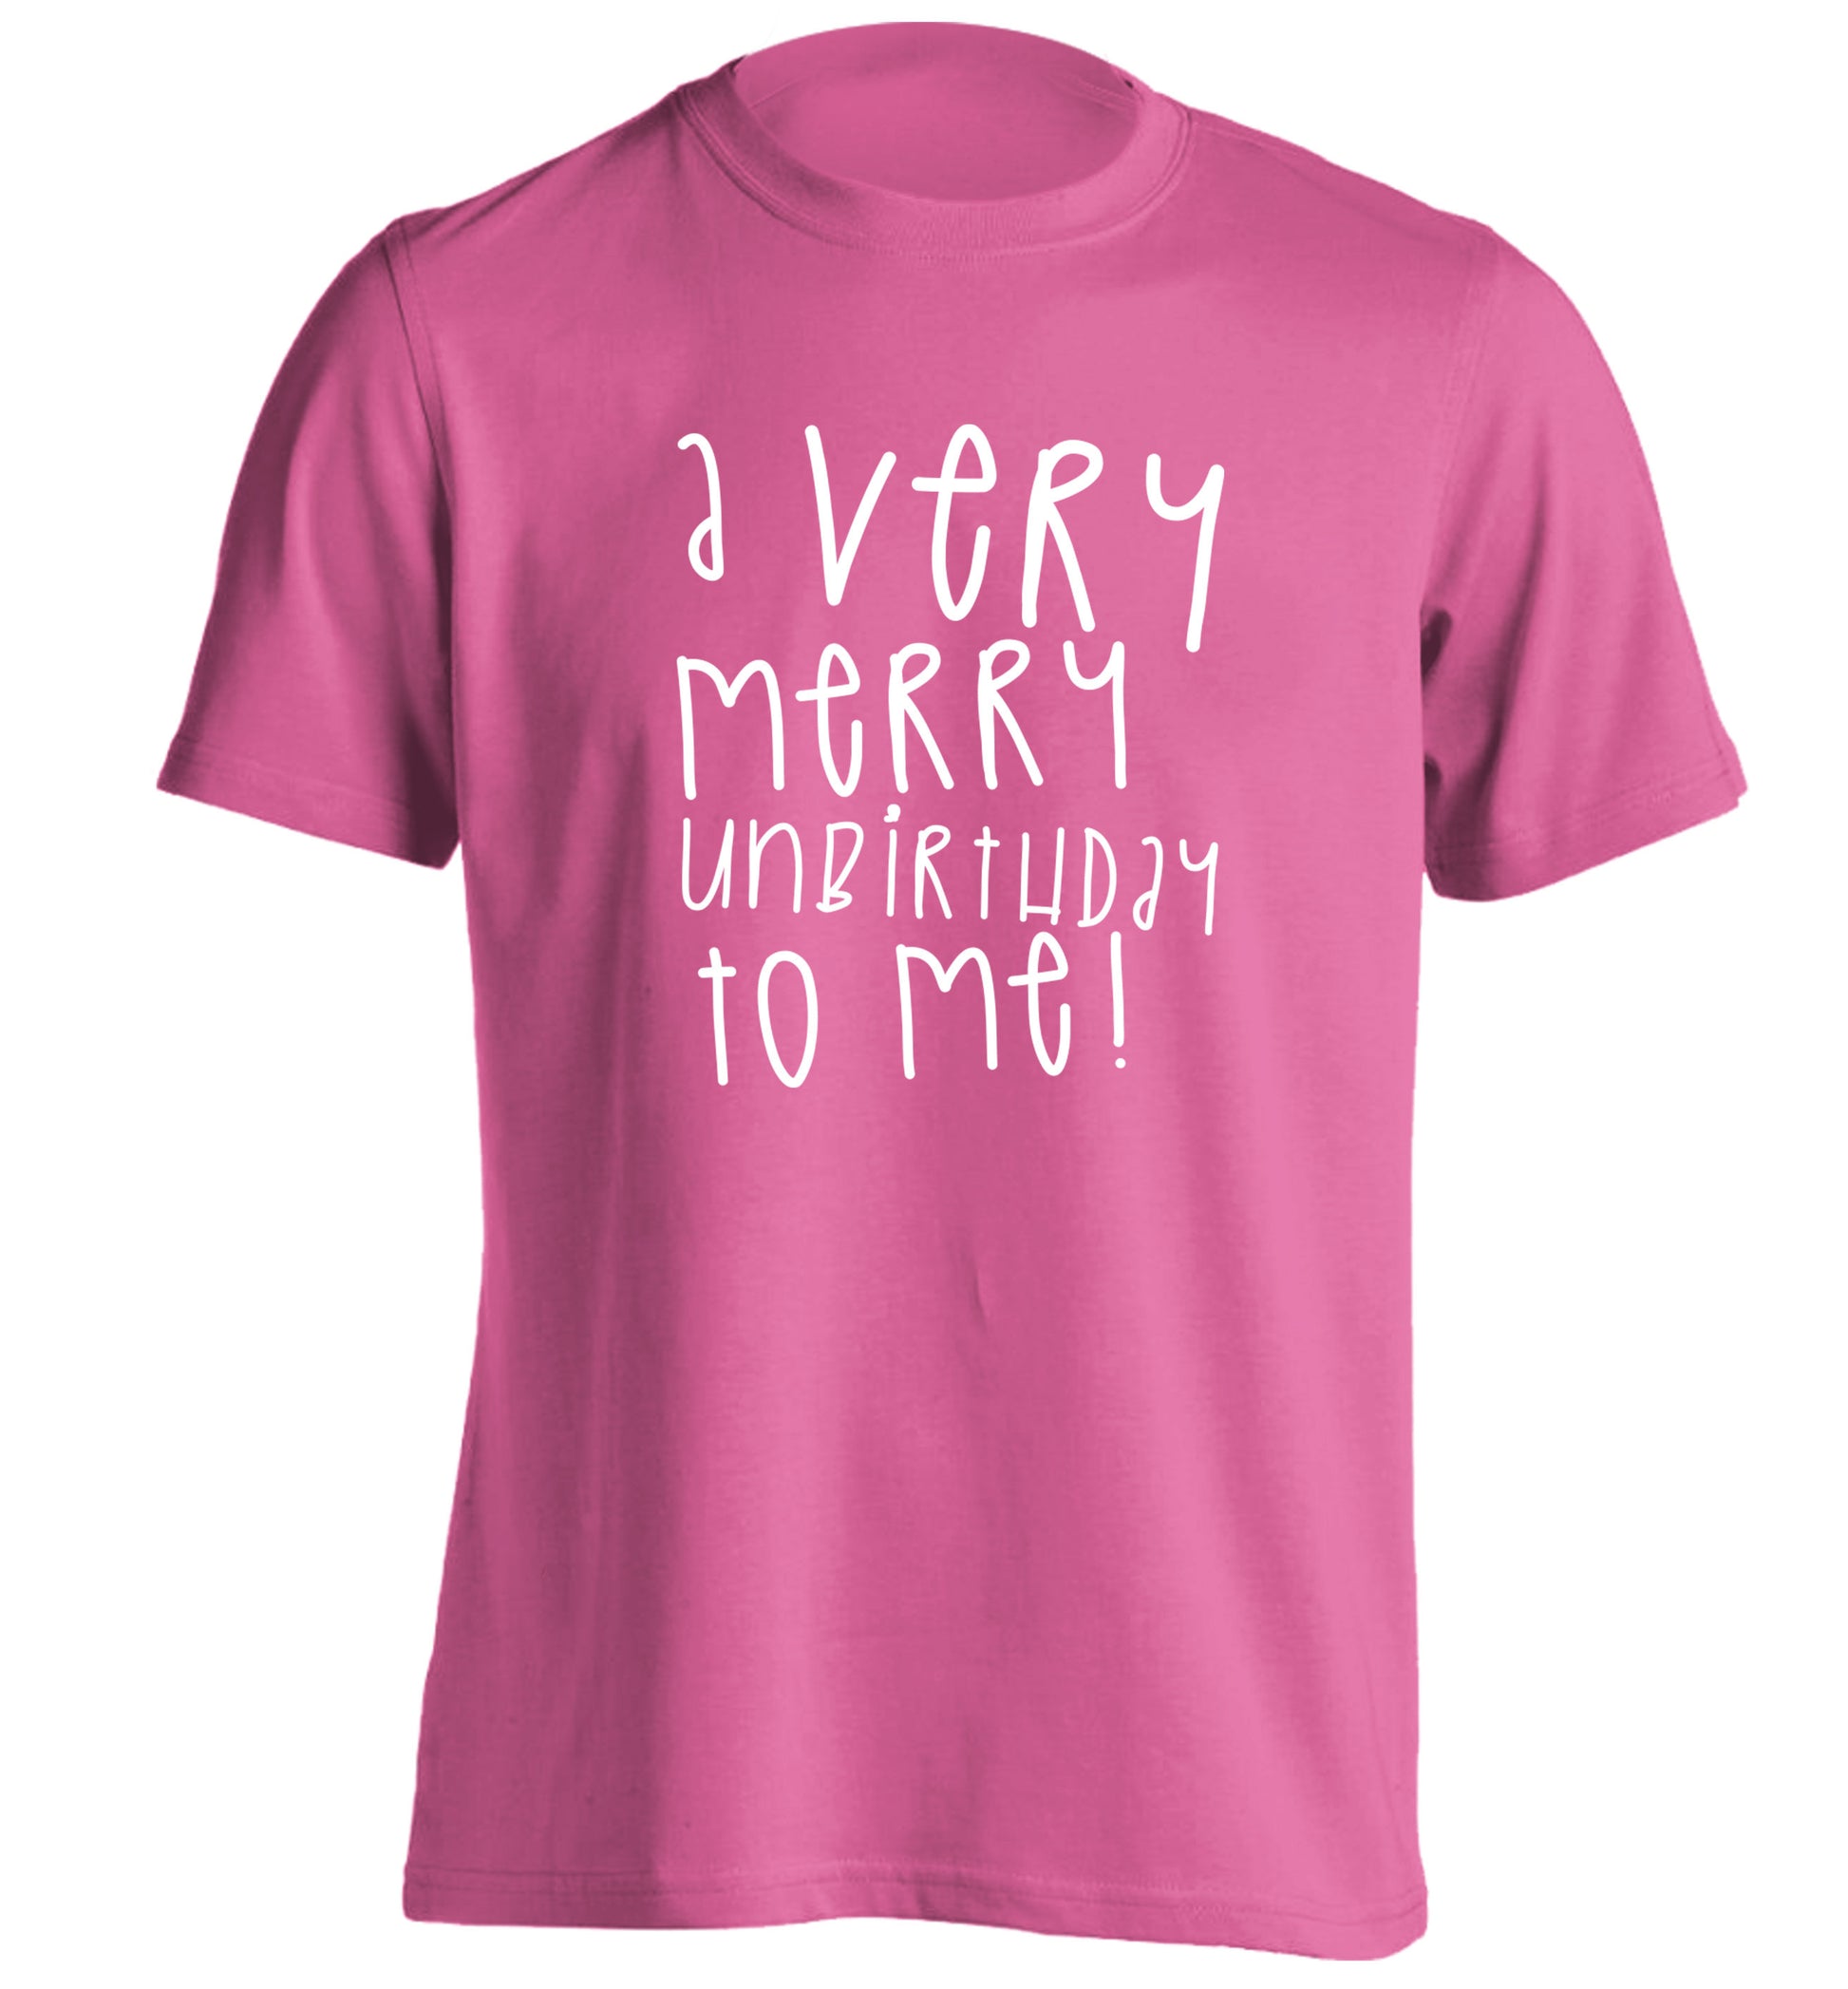 A very merry unbirthday to me! adults unisex pink Tshirt 2XL